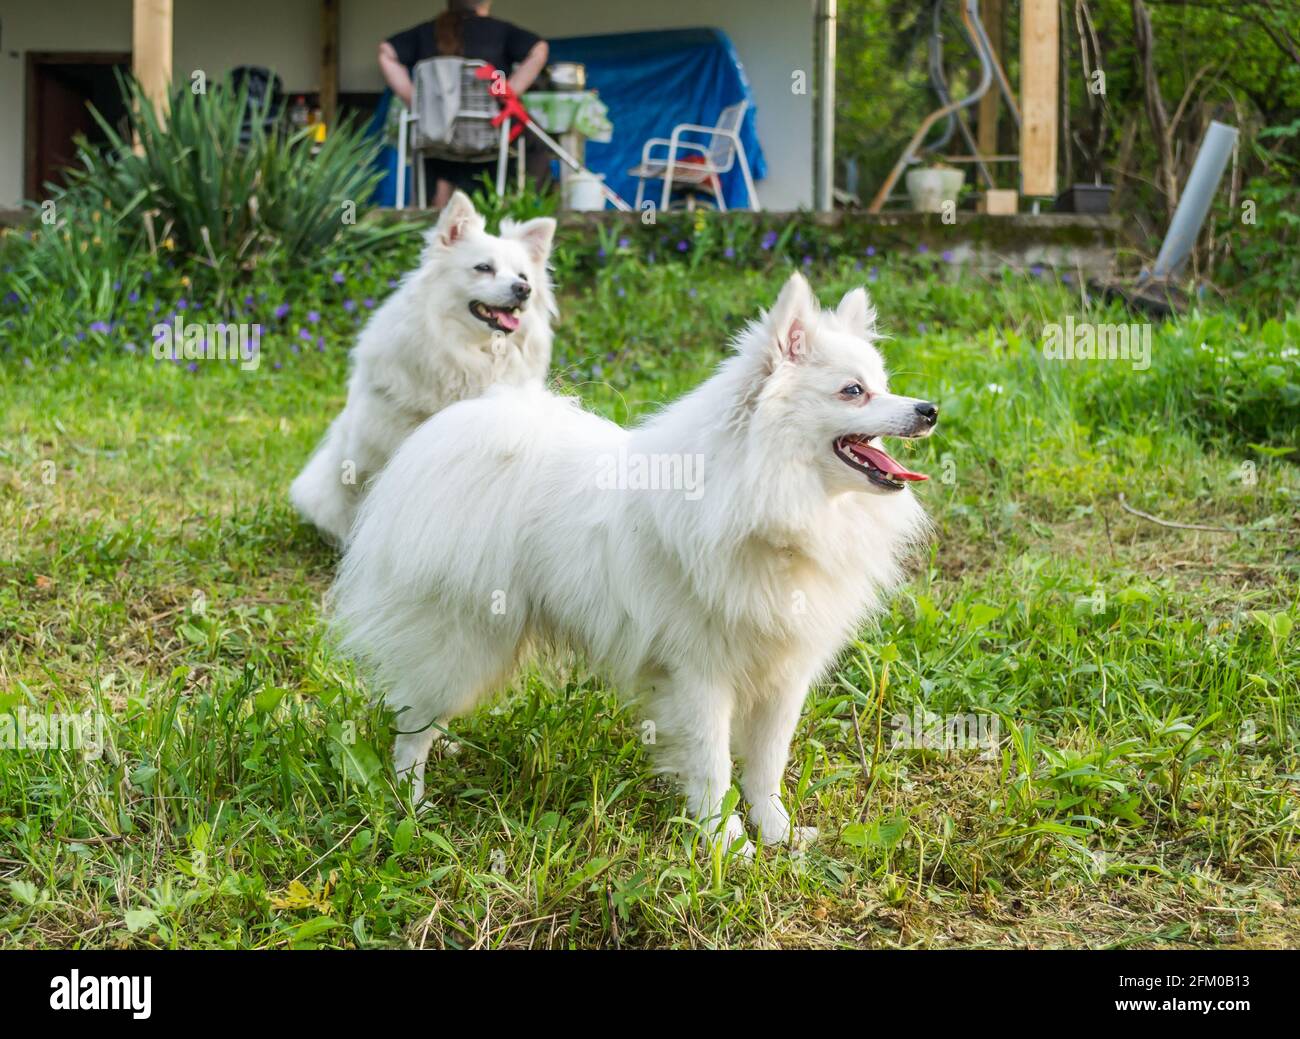 Two Japanese Spitz Dogs In A Green Grassy Yard Of A Private Property Stock Photo Alamy